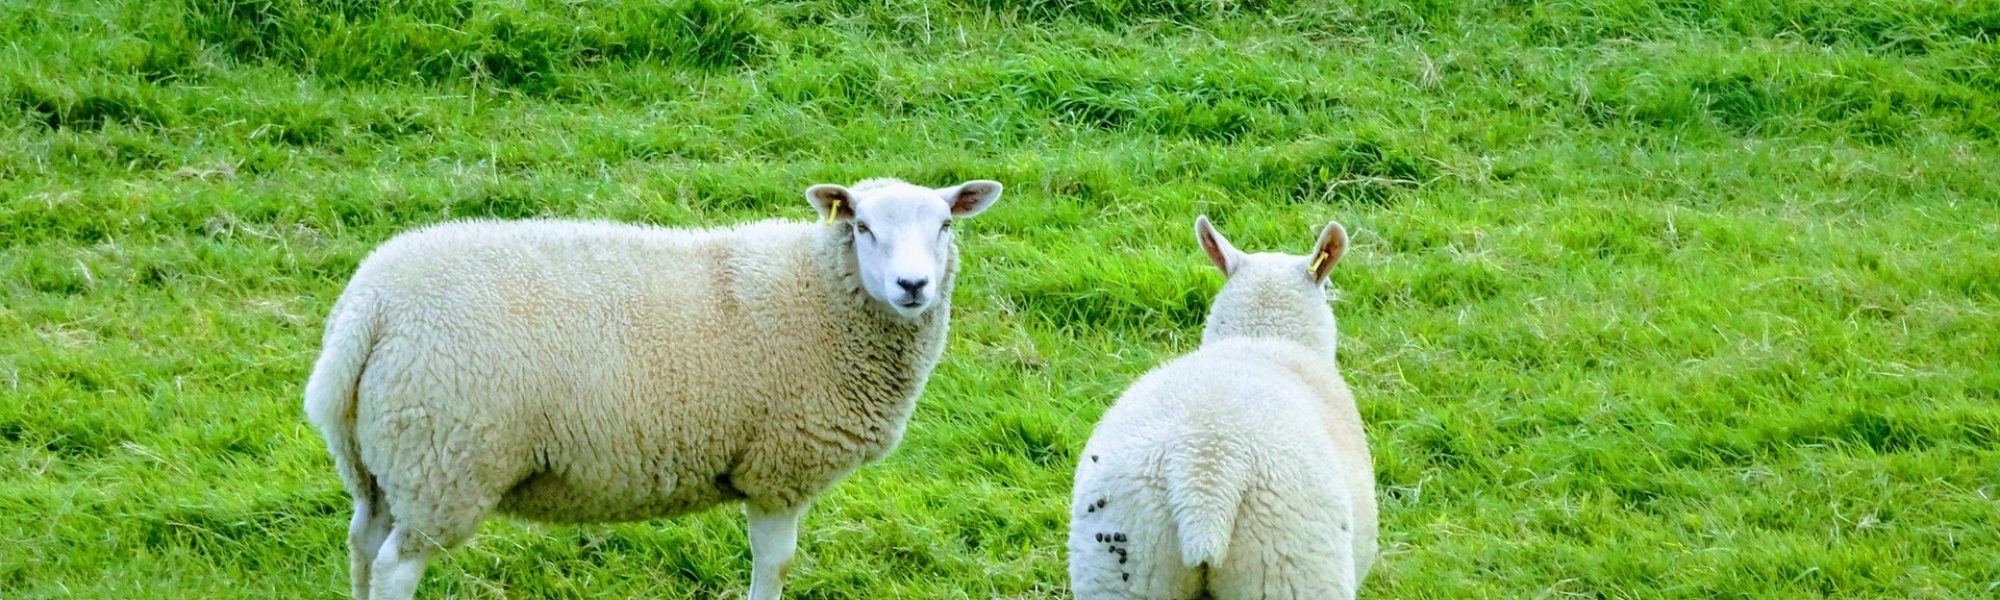 Two sheep in green field